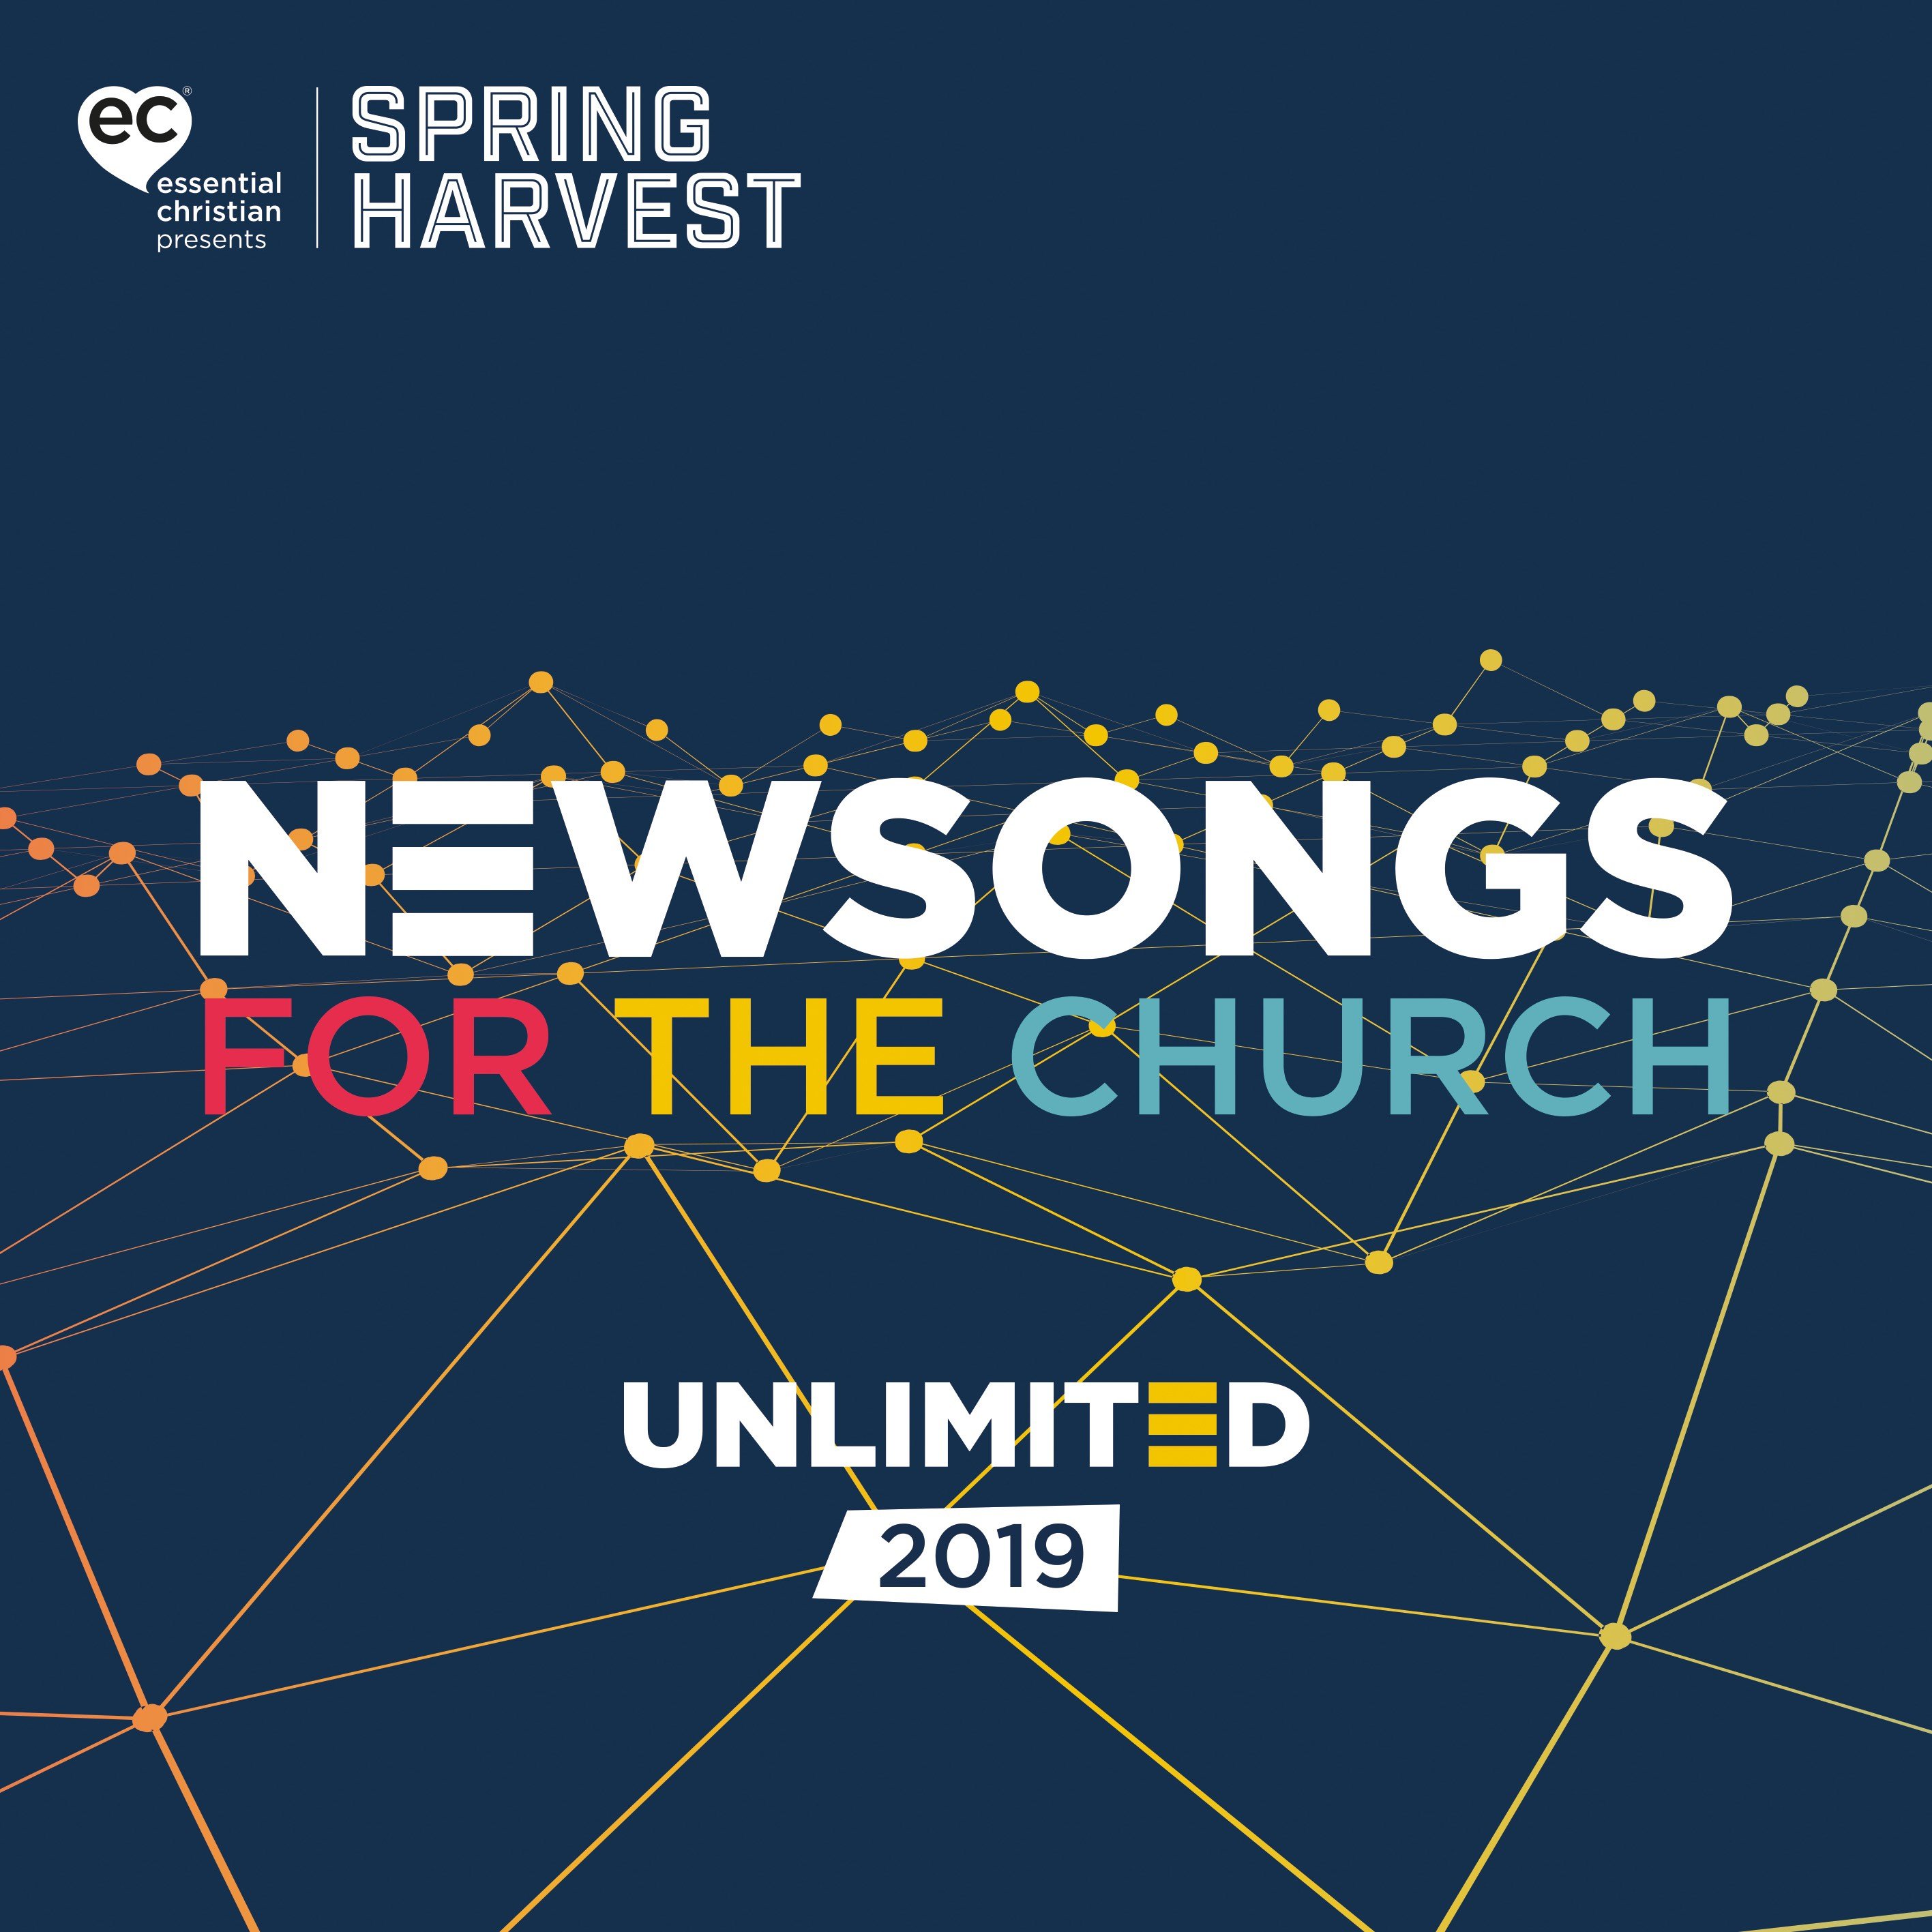 Spring Harvest Newsongs for the Church 2019